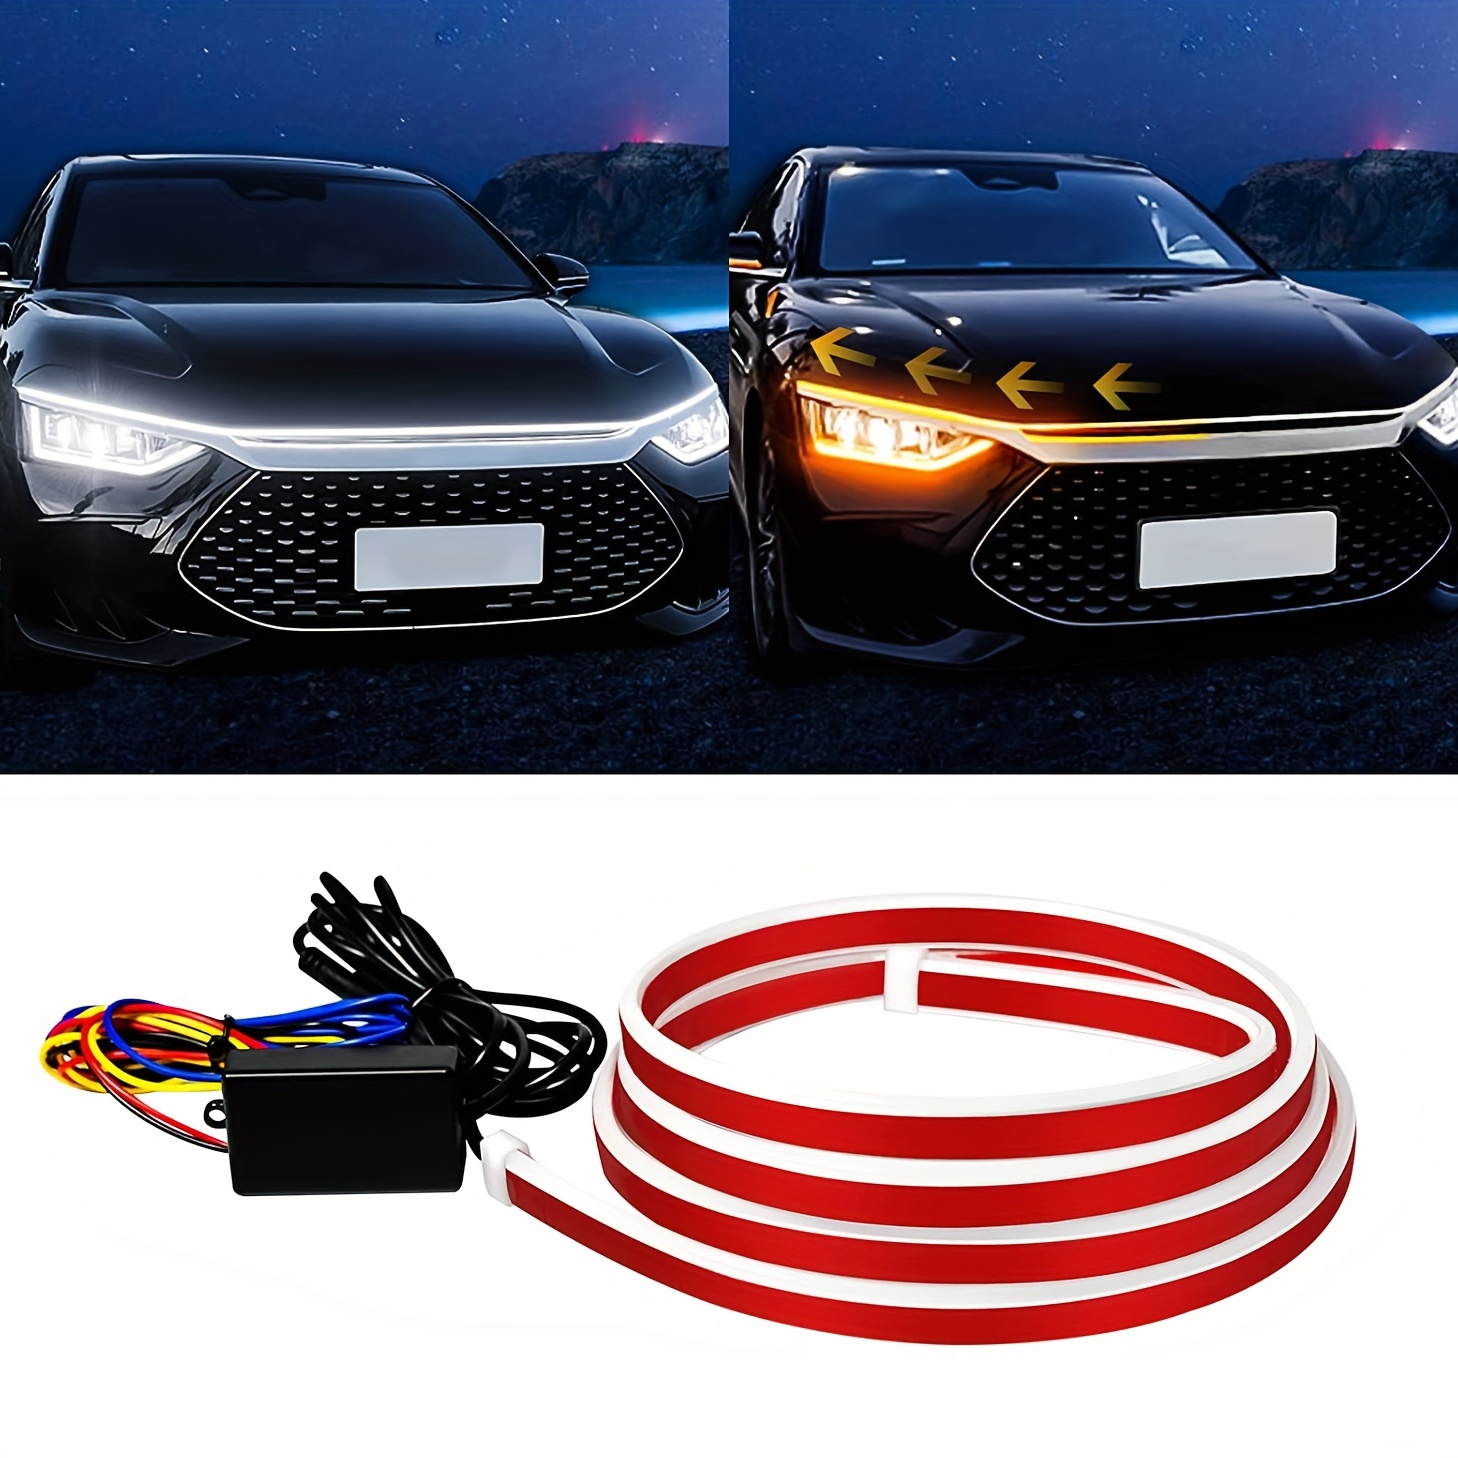 Auto Led Innenbeleuchtung,5m Auto Innenraumbeleuchtung,Led Atmosphäre Licht  Auto,Auto LED Streifen,Led Tape Auto,Wasserdicht Ambientebeleuchtung,Led